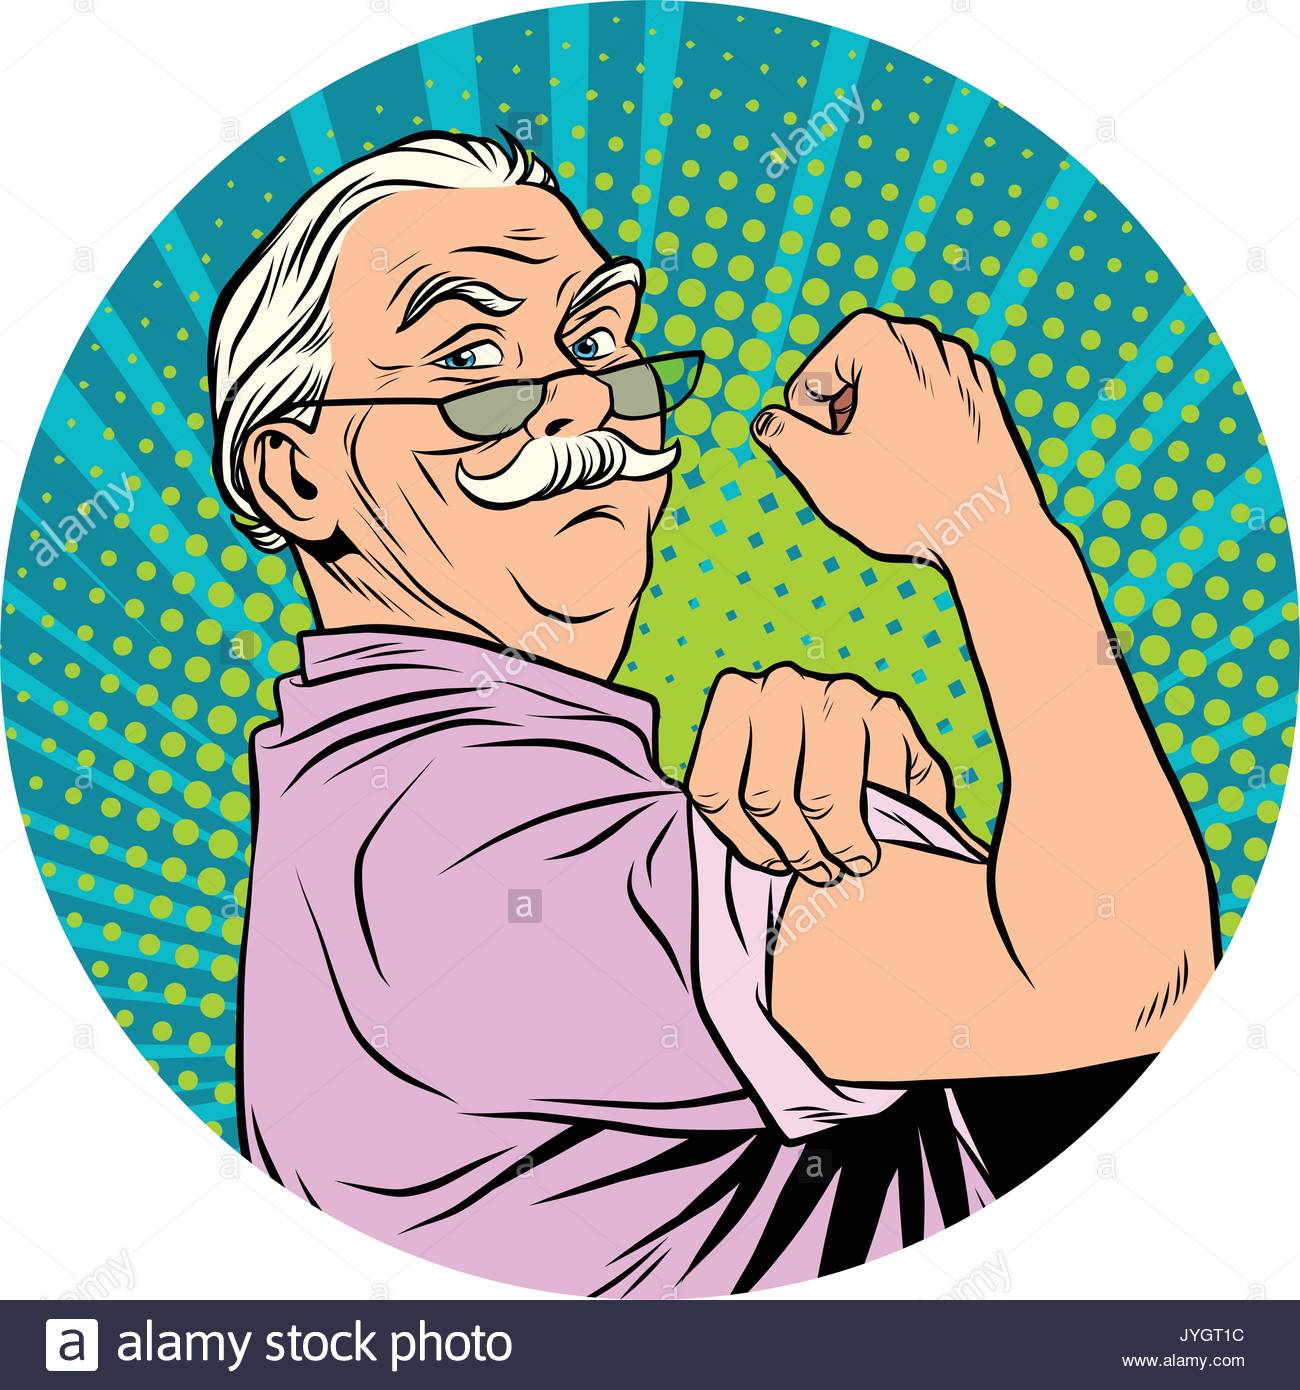 Old man, pension, retirement icon | Icon search engine